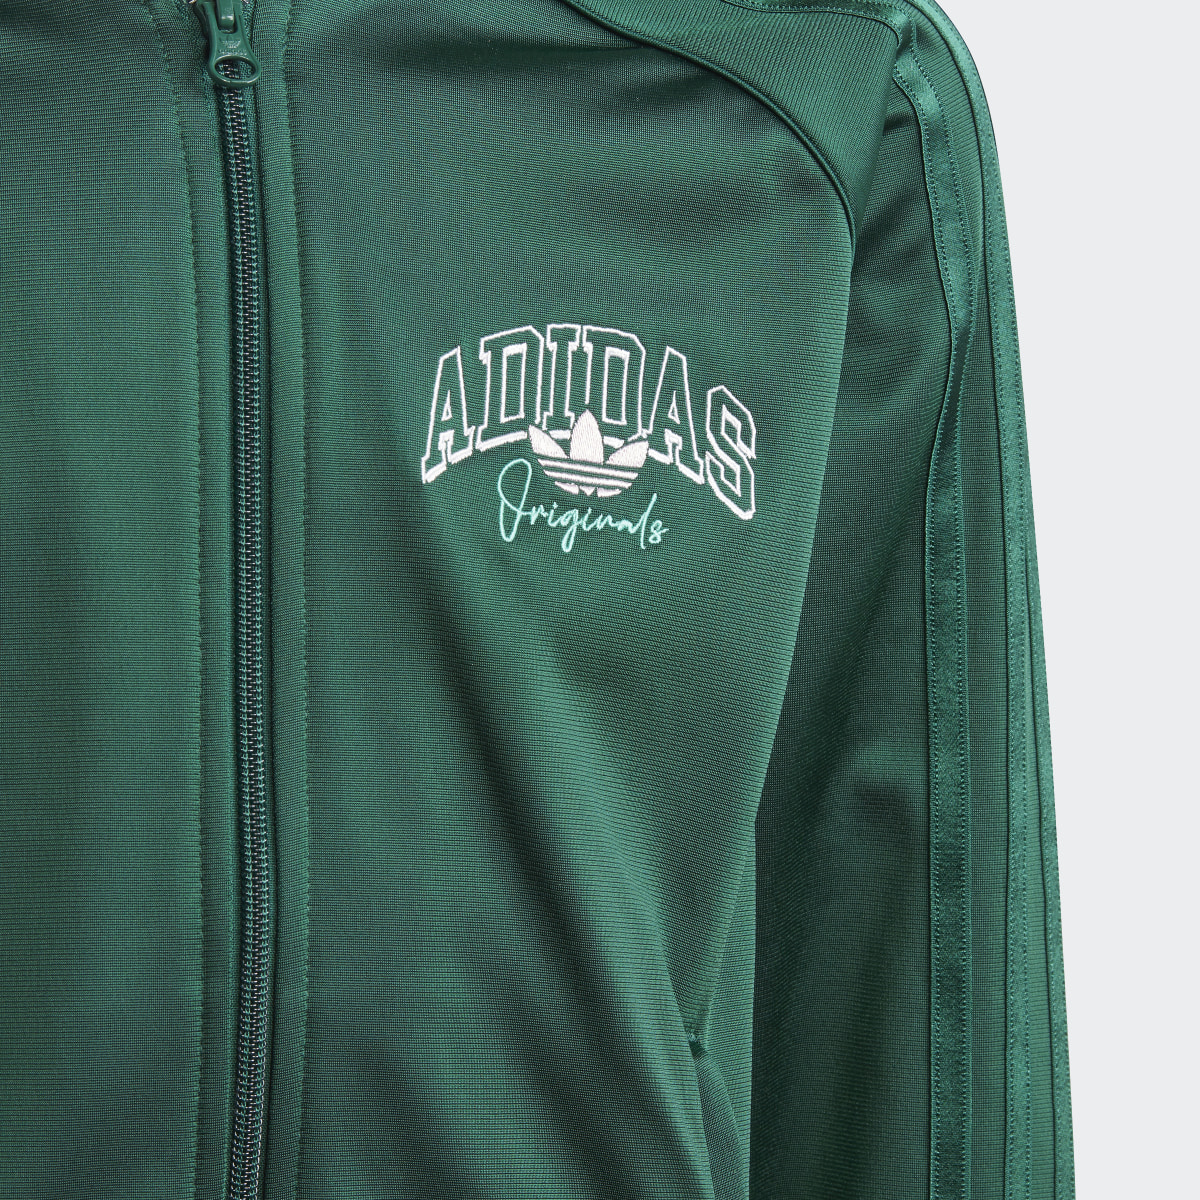 Adidas Track top Collegiate Graphic Pack SST. 4